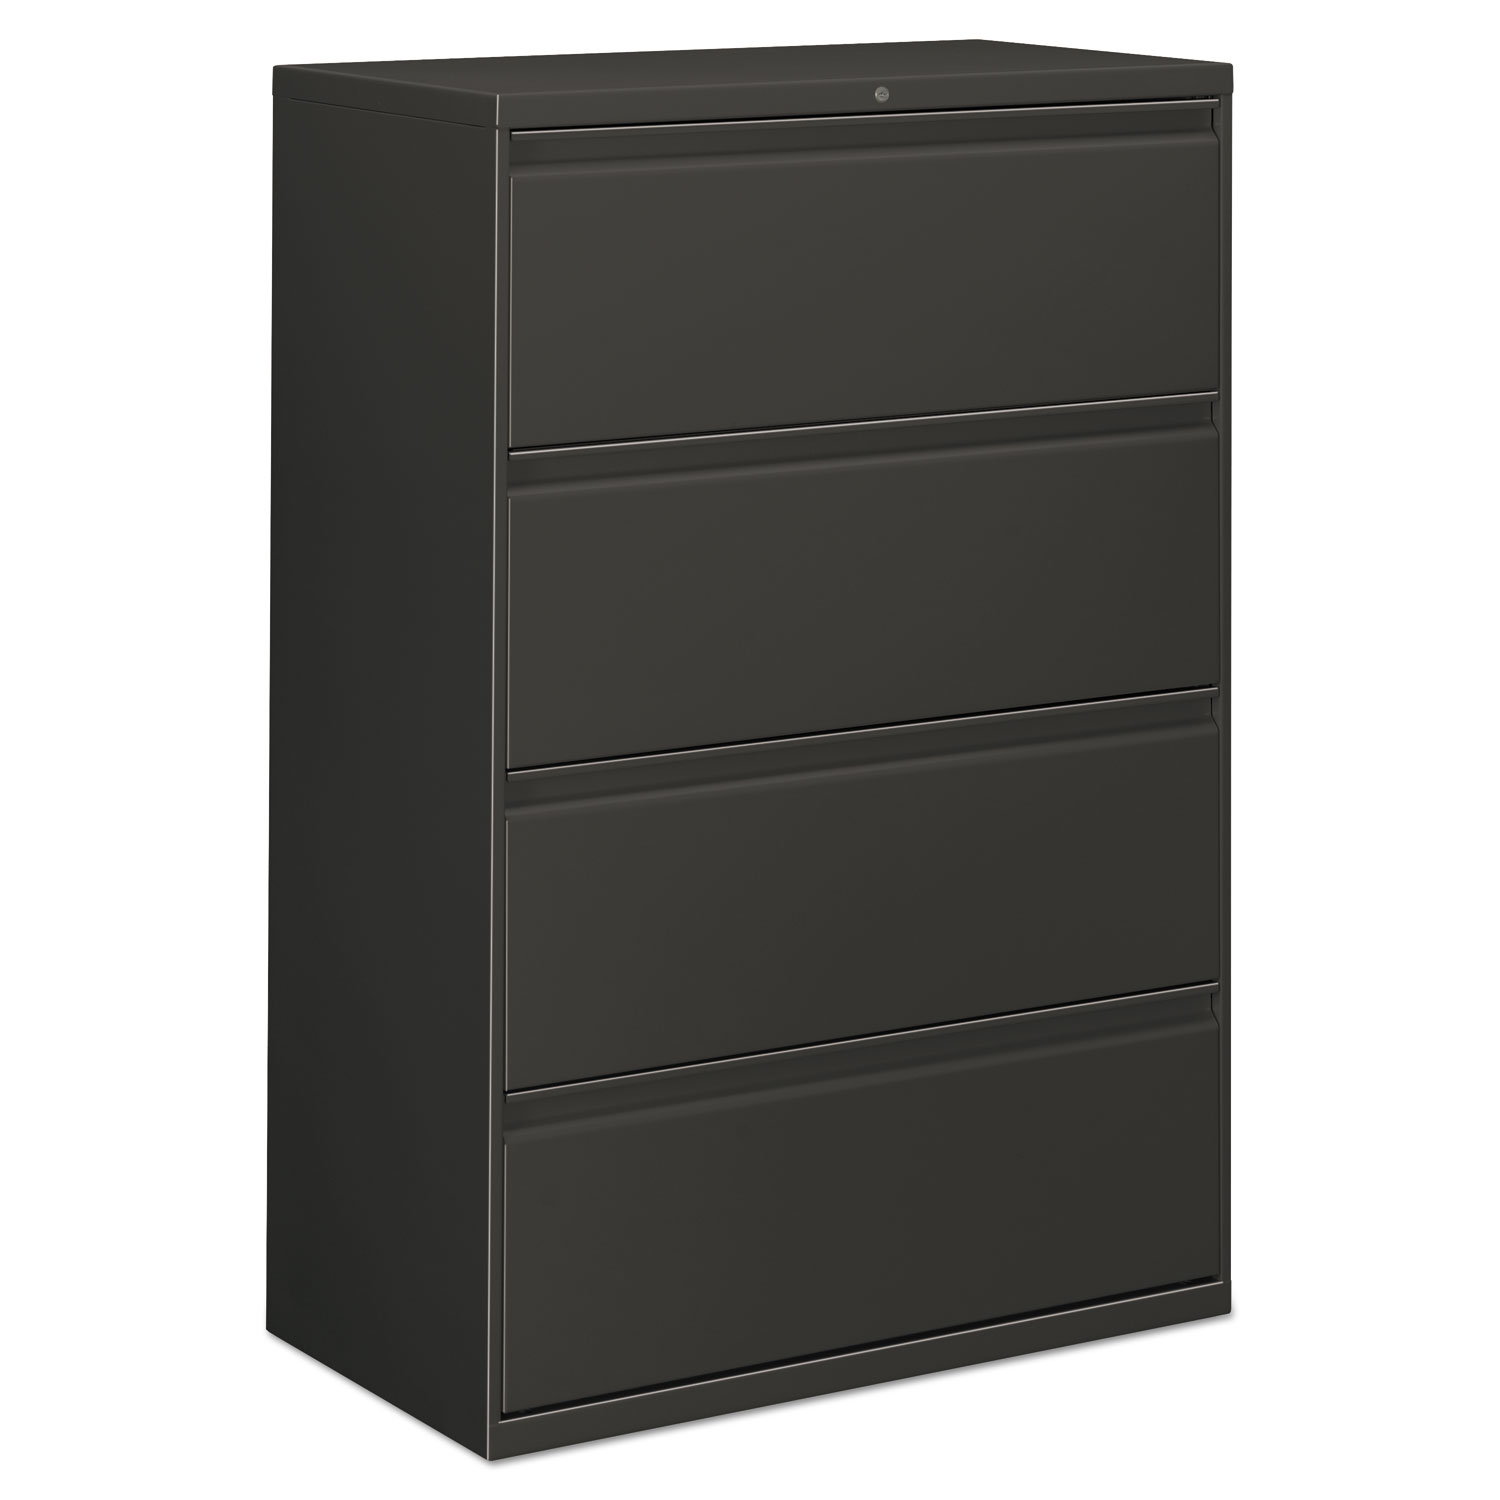 Four-Drawer Lateral File Cabinet, 36w x 18d x 52 1/2h, Charcoal